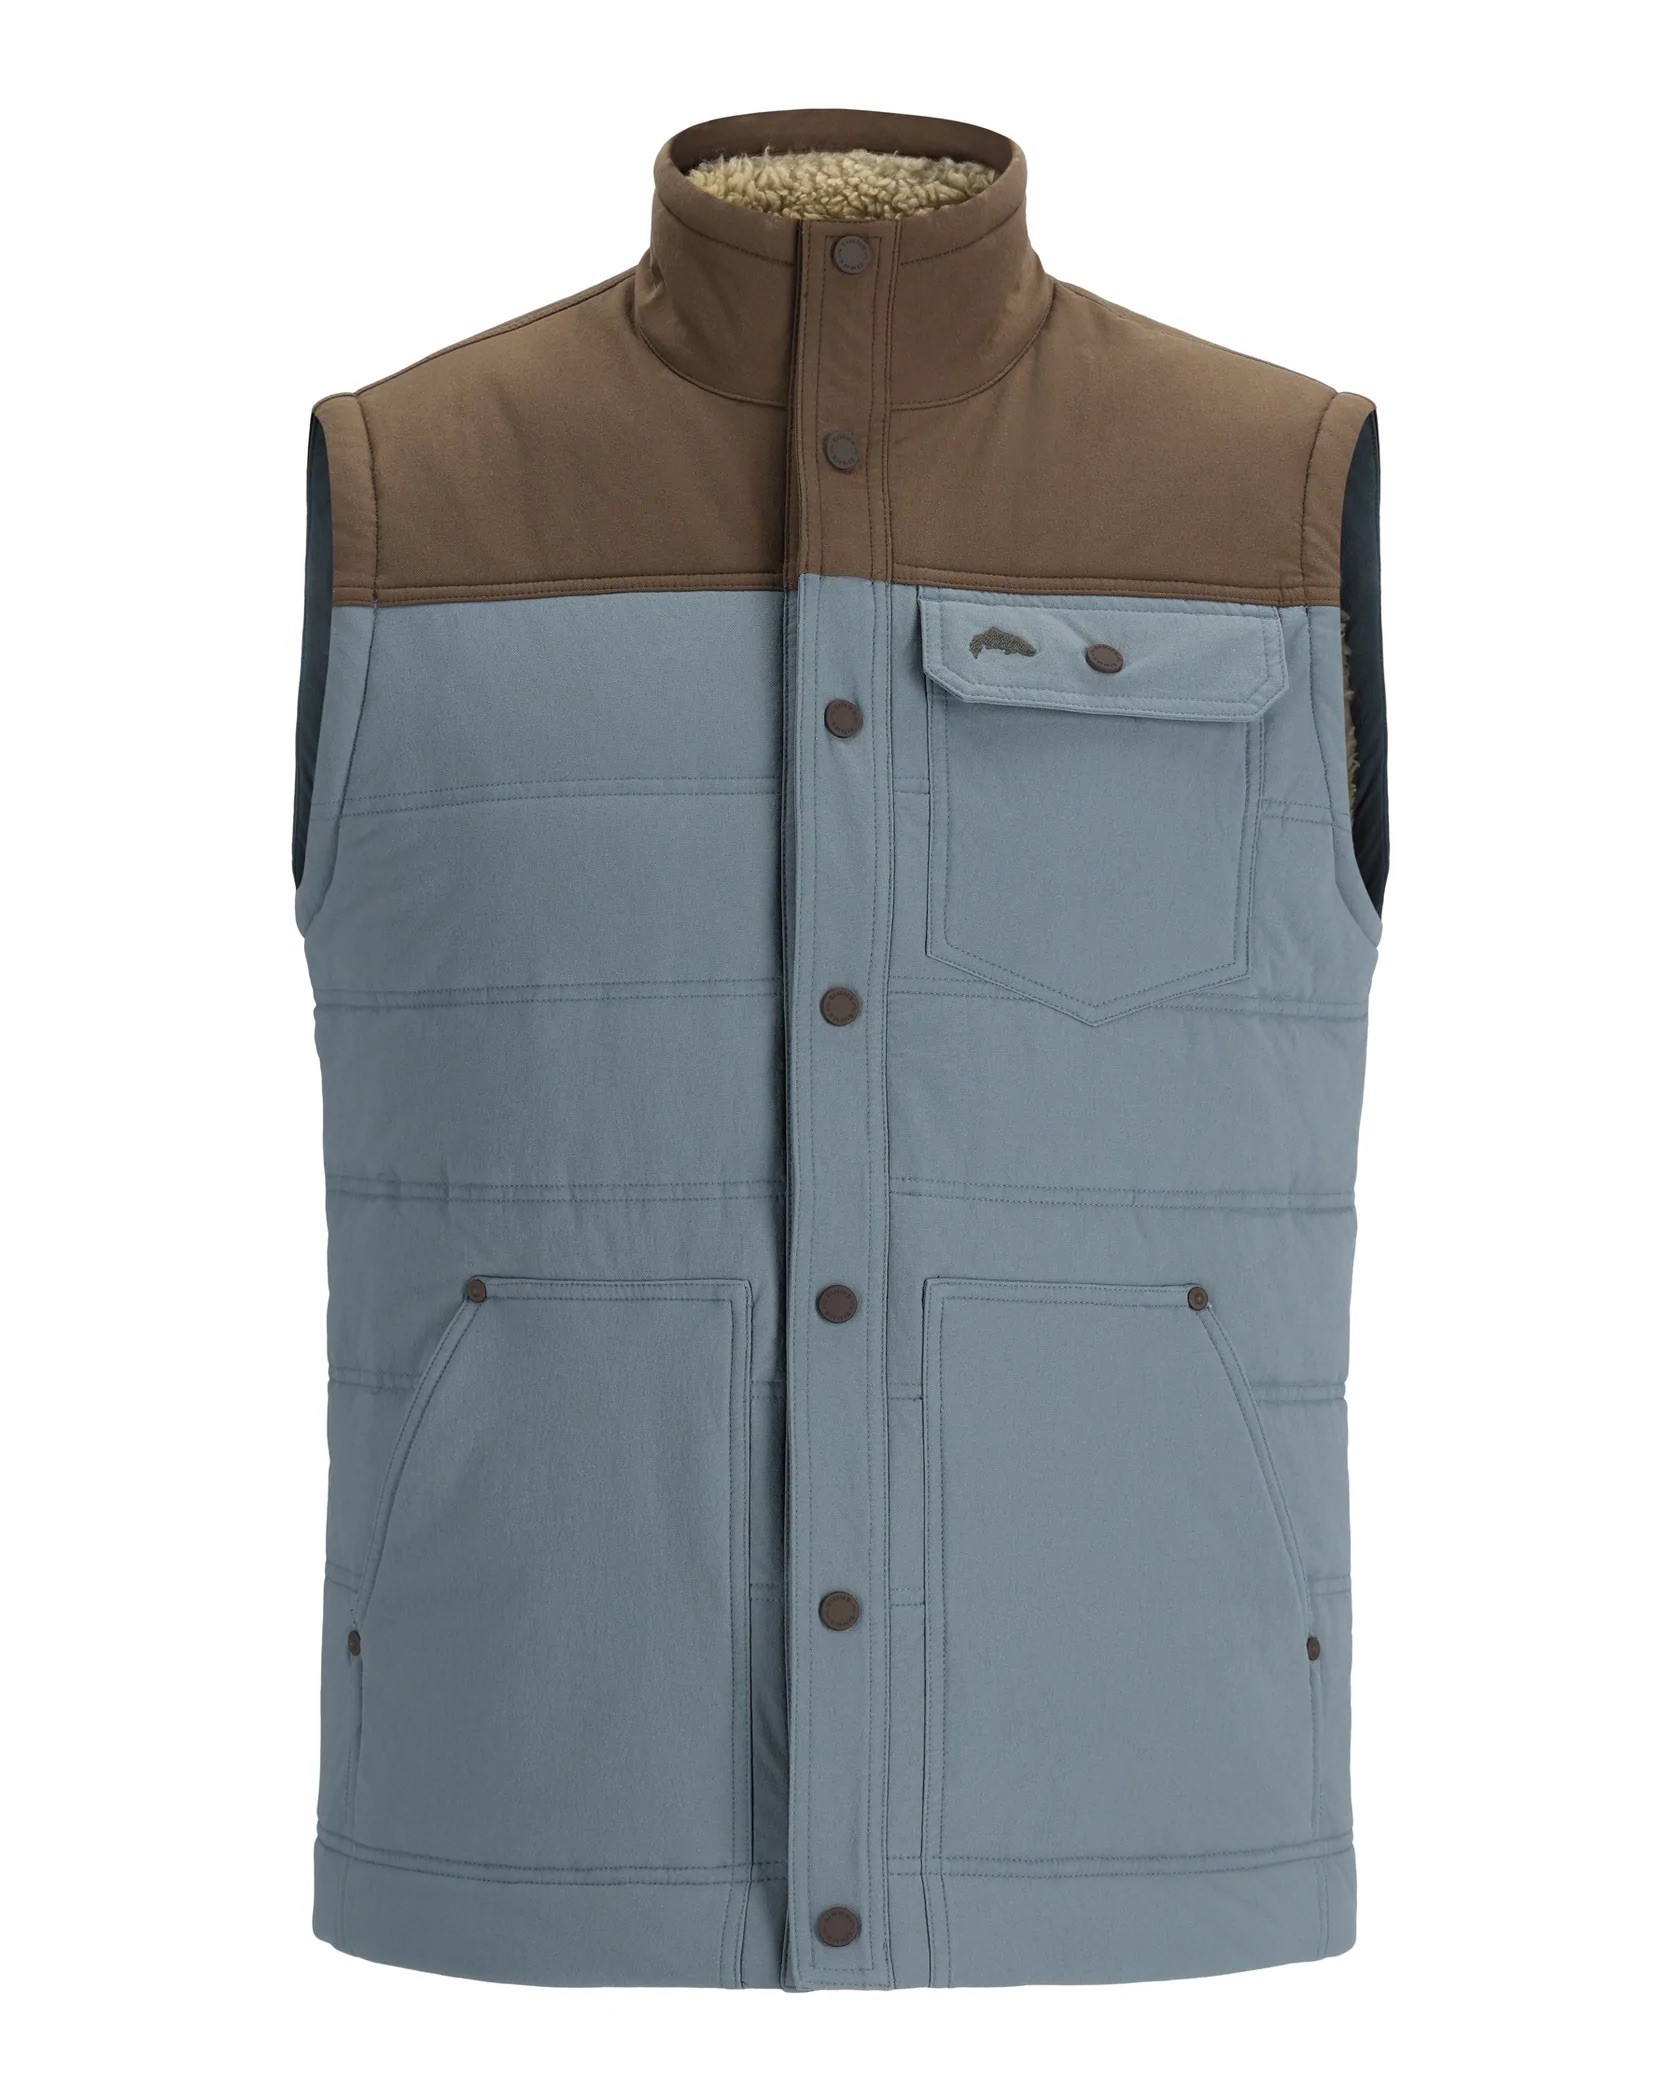 Simms M's Cardwell Vest - Storm/Hickory - Large